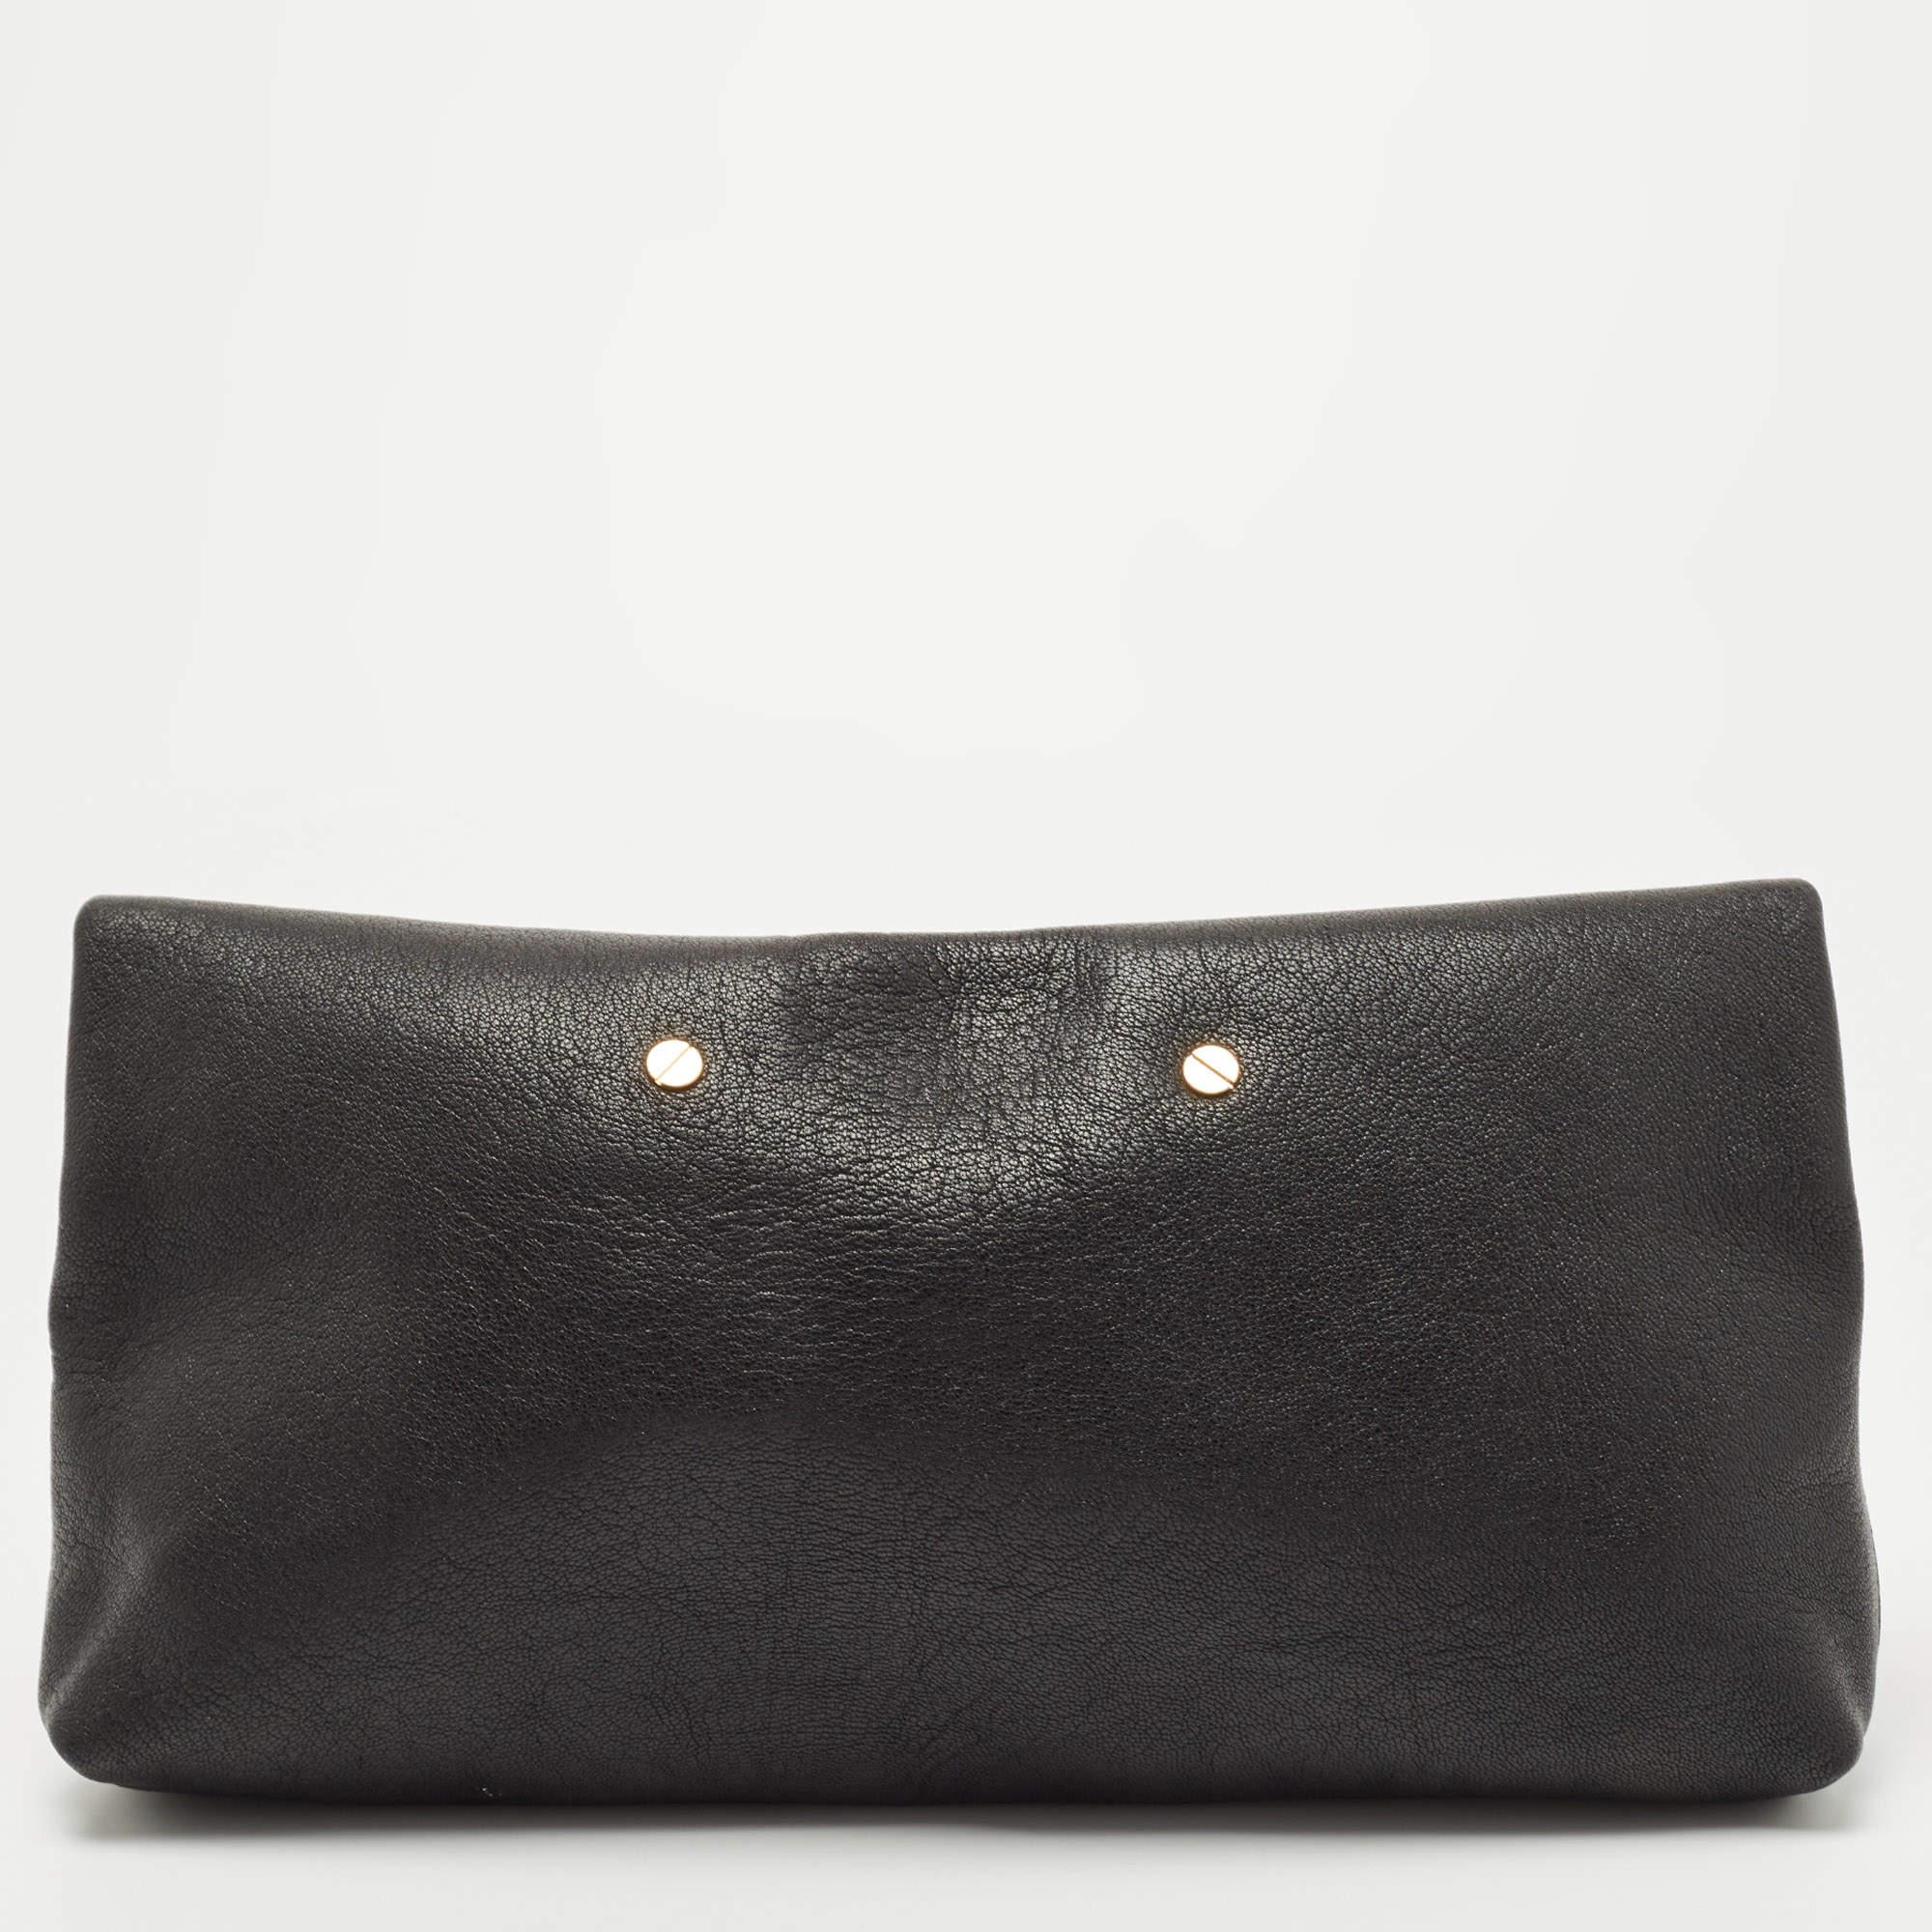 One of the most recognizable bags in the luxury world, Chloe's Drew bag was part of the label's fall/winter 2014 collection. It carries a distinct shape and minimal style detailing. This clutch version has been meticulously crafted from leather in a